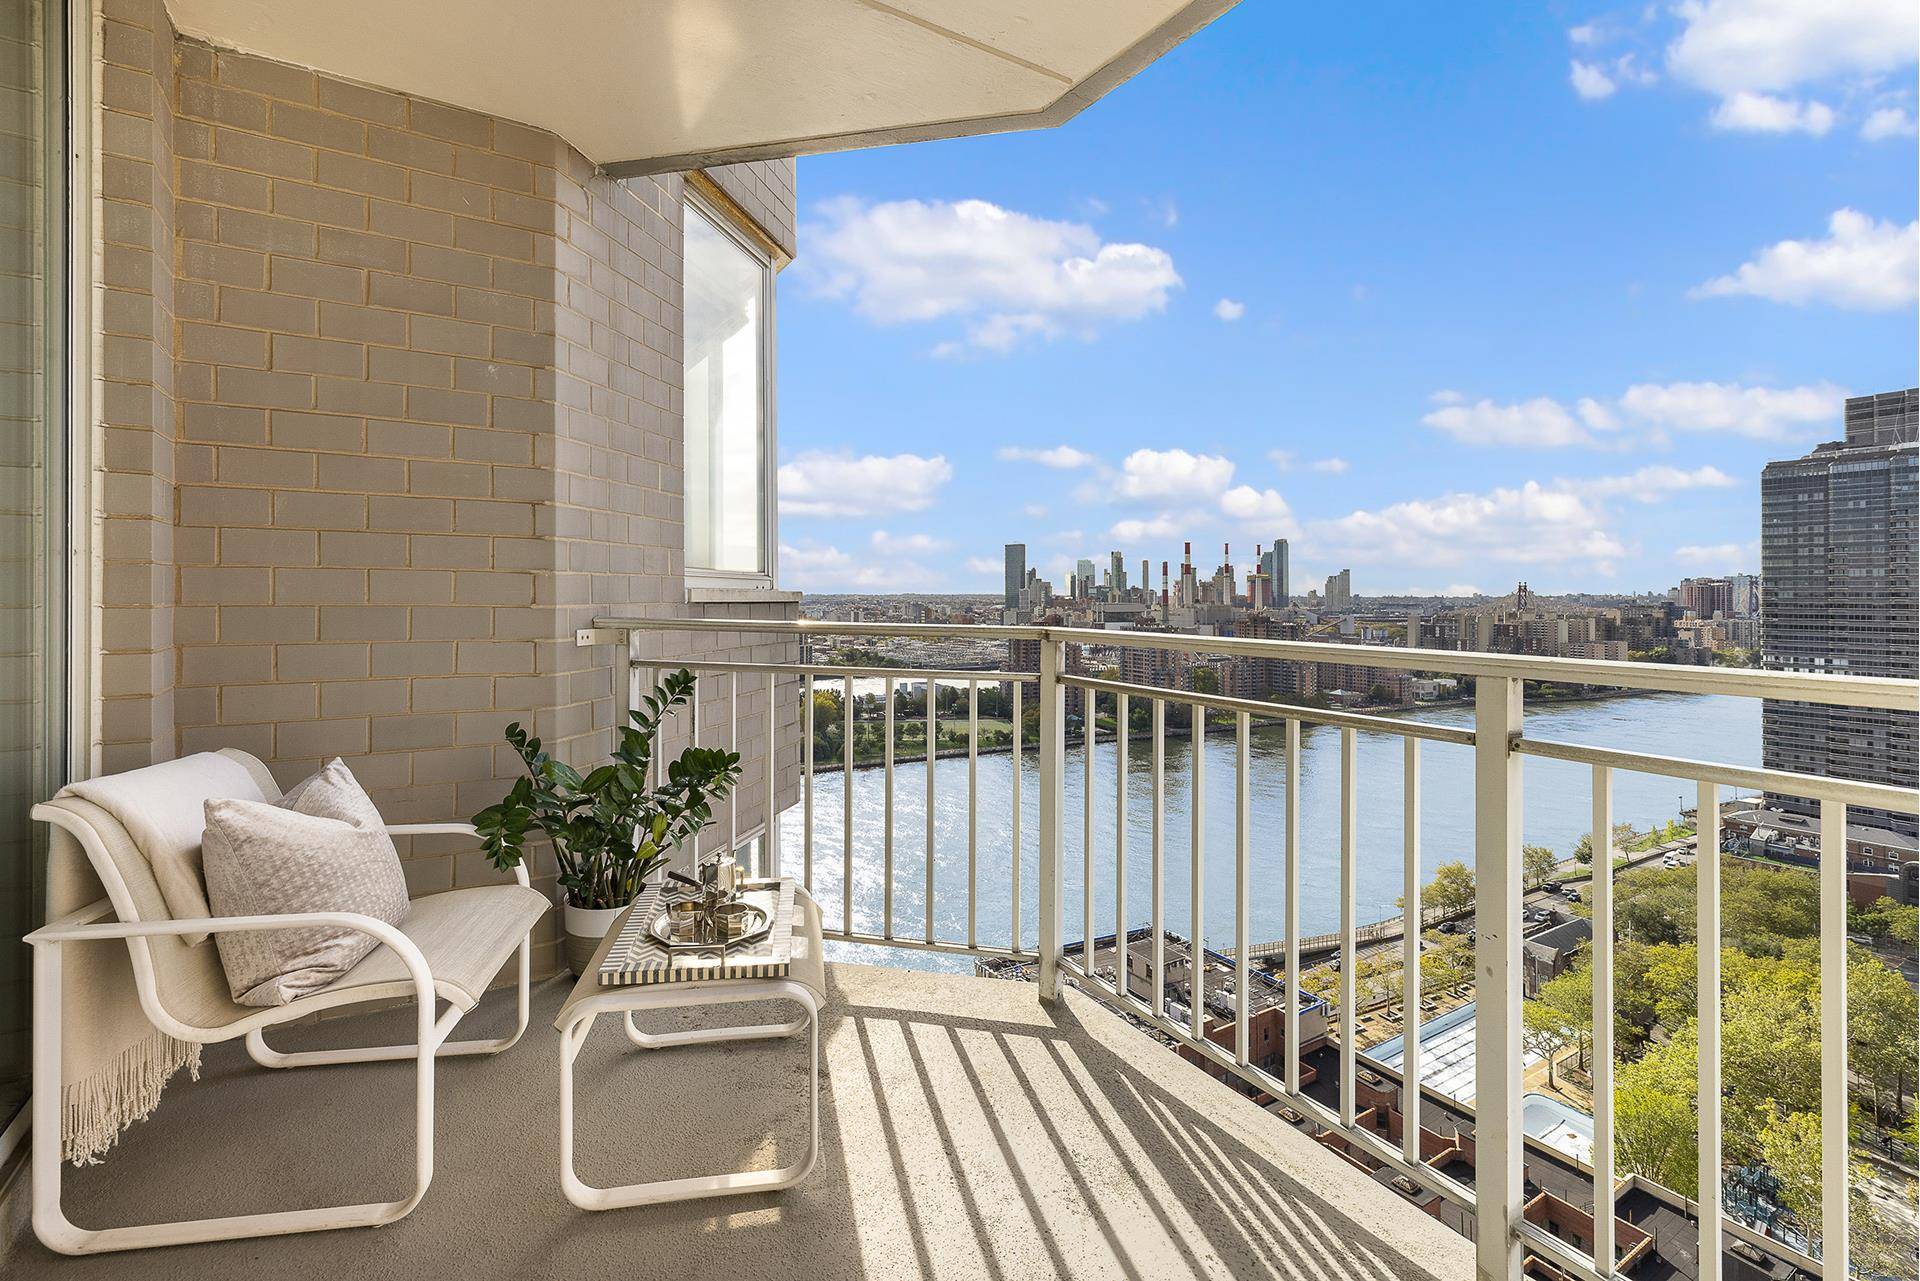 VIEWS, VIEWS, VIEWS ! ! Convertible 3 bedroom layout Floorplan attached Spectacular East River, NYC skyline, and bridge views south and north are on display from every room of this ...